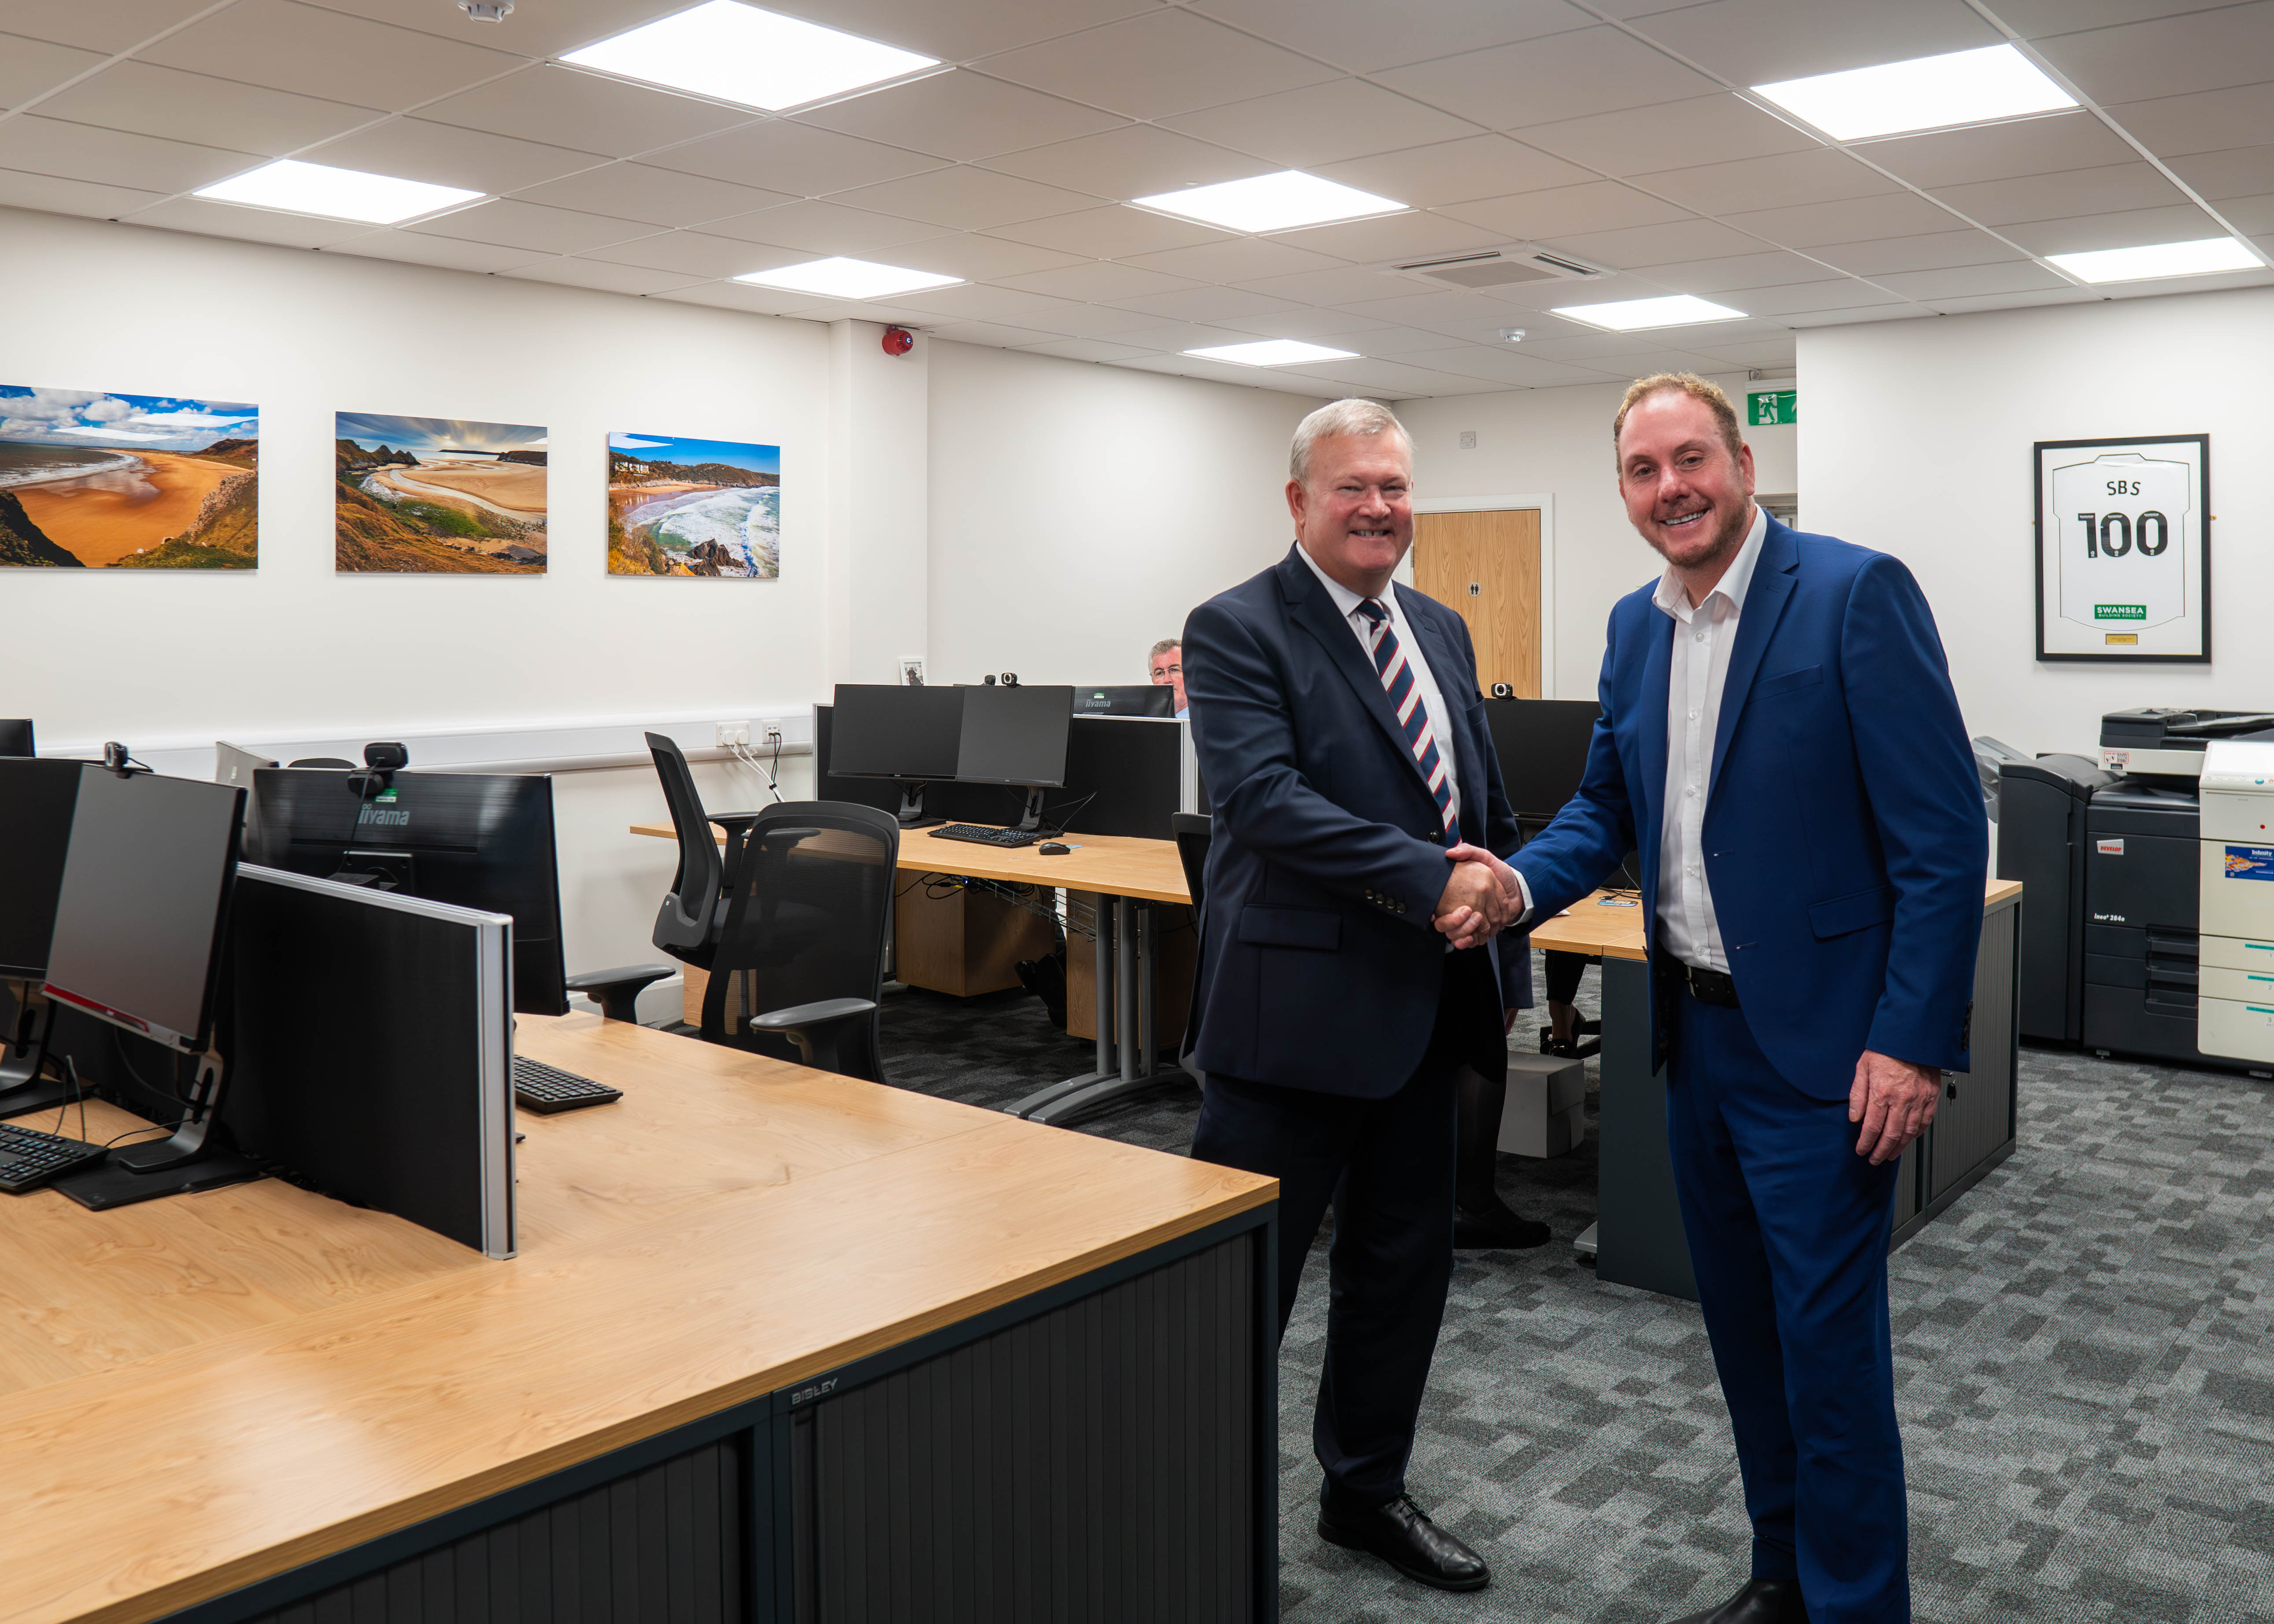 Proud to welcome Cllr Rob Stewart for official opening of our head office expansion